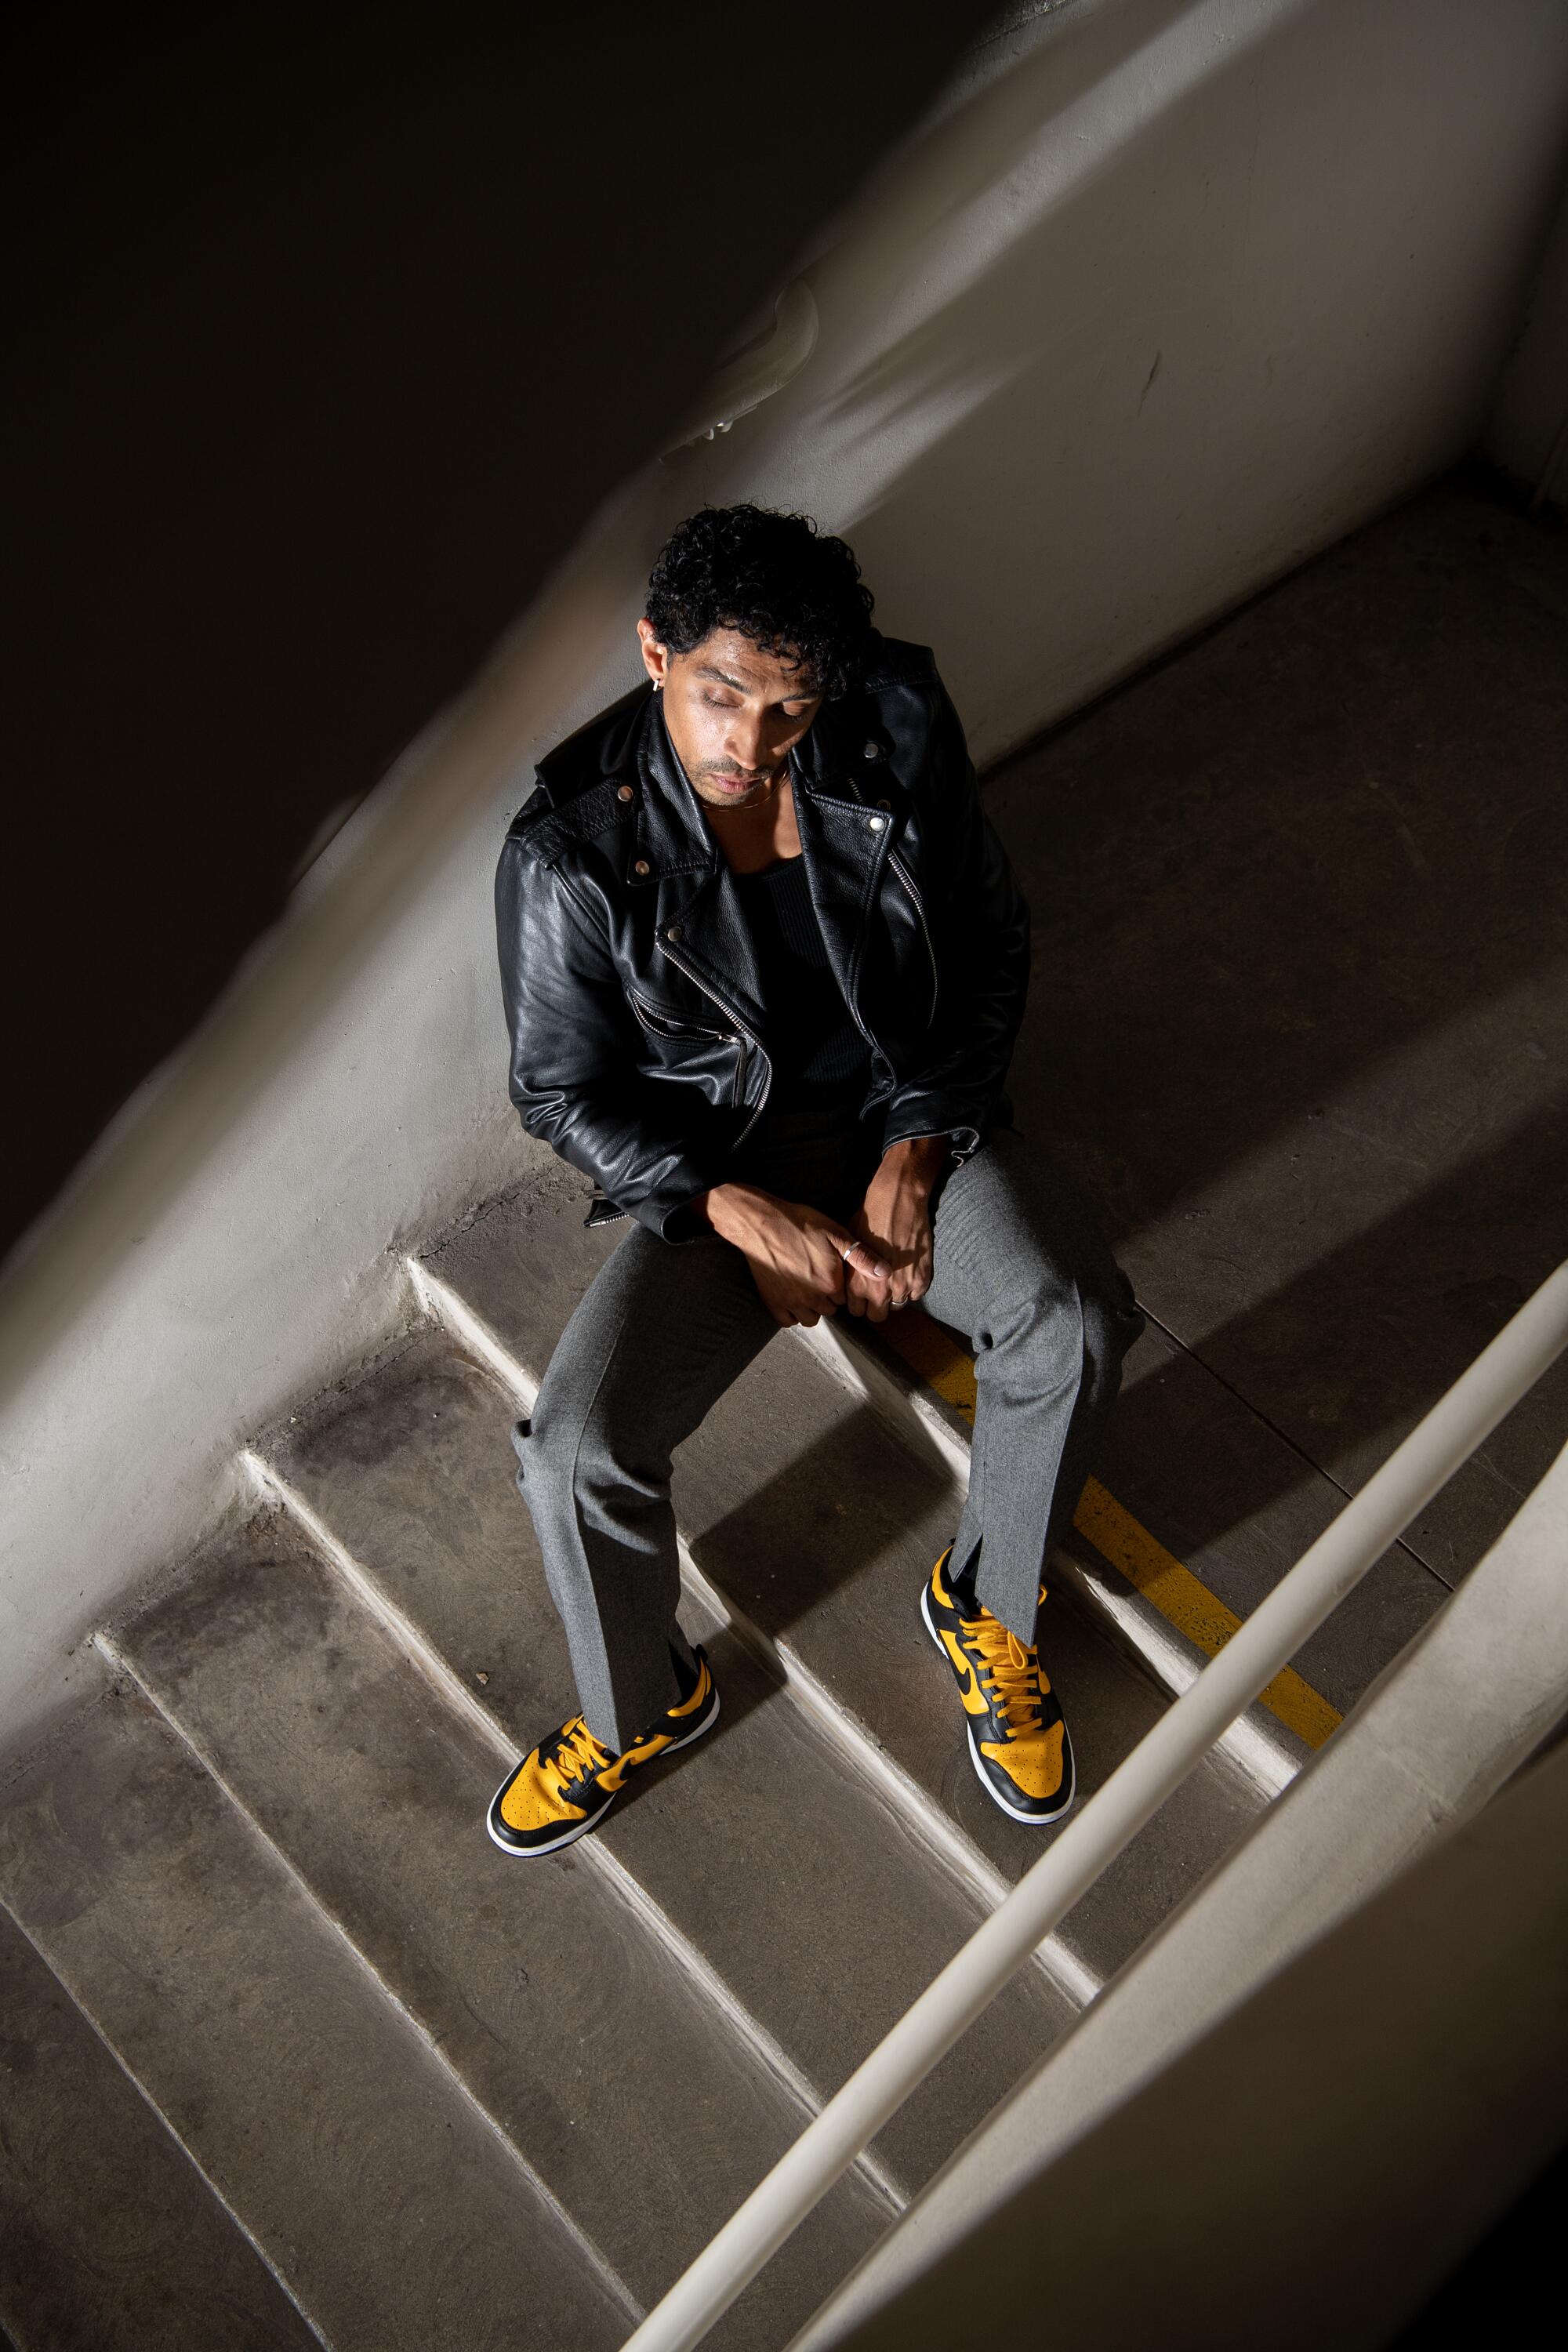 A man sits on stairwell wearing a leather jacket, gray pants, and yellow sneakers.